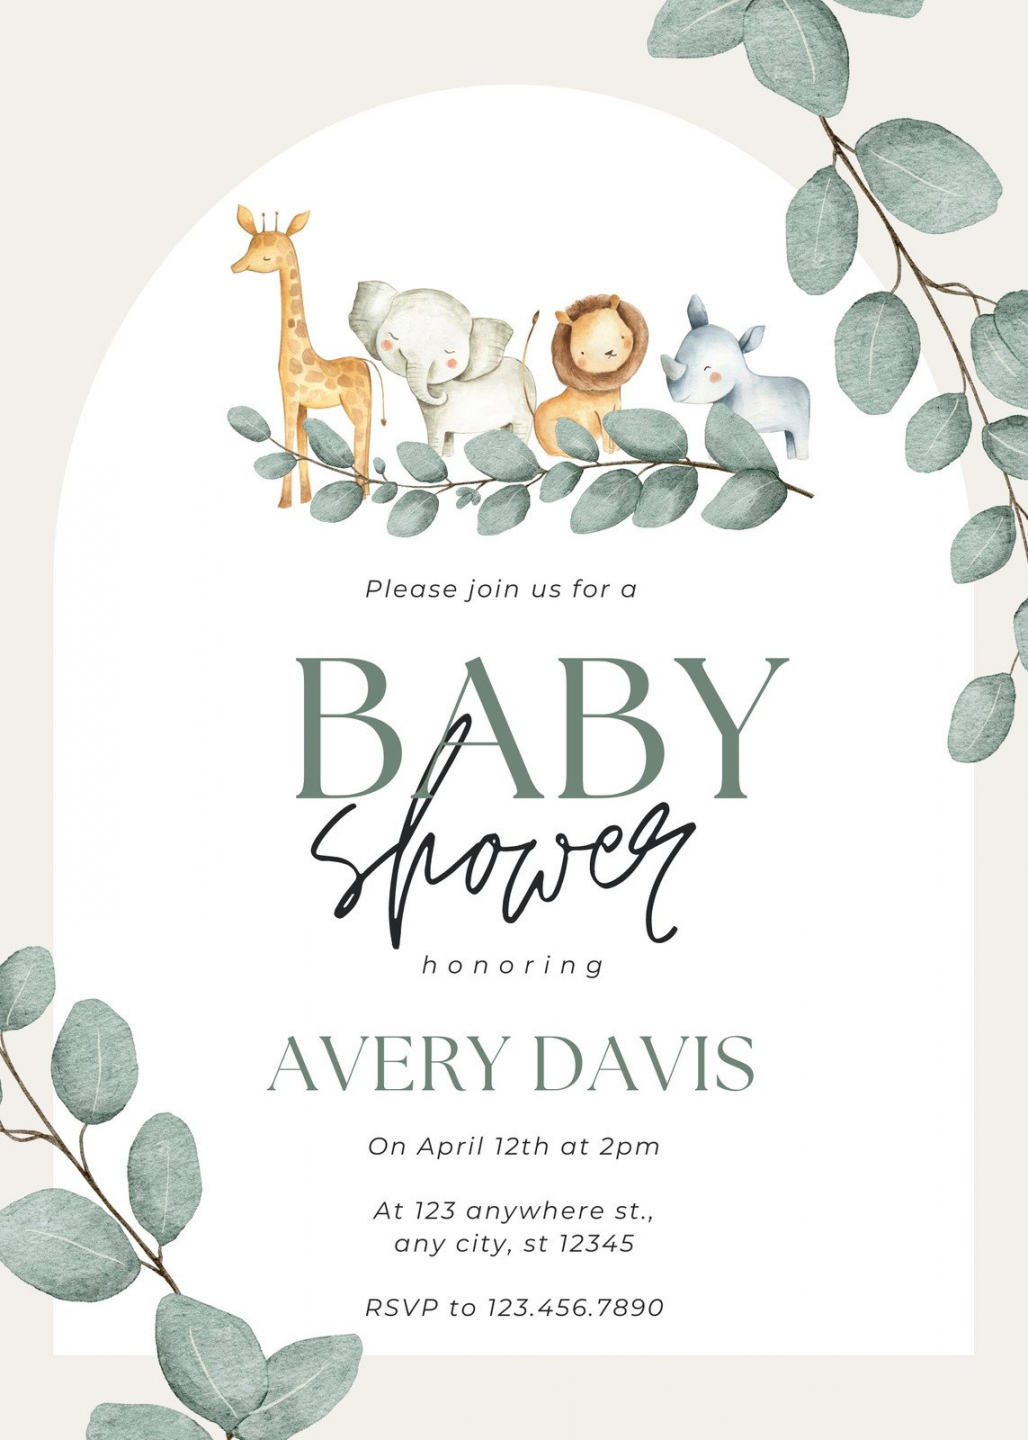 Free and customizable baby shower templates - FREE Printables - Free Printable Baby Shower Invitations